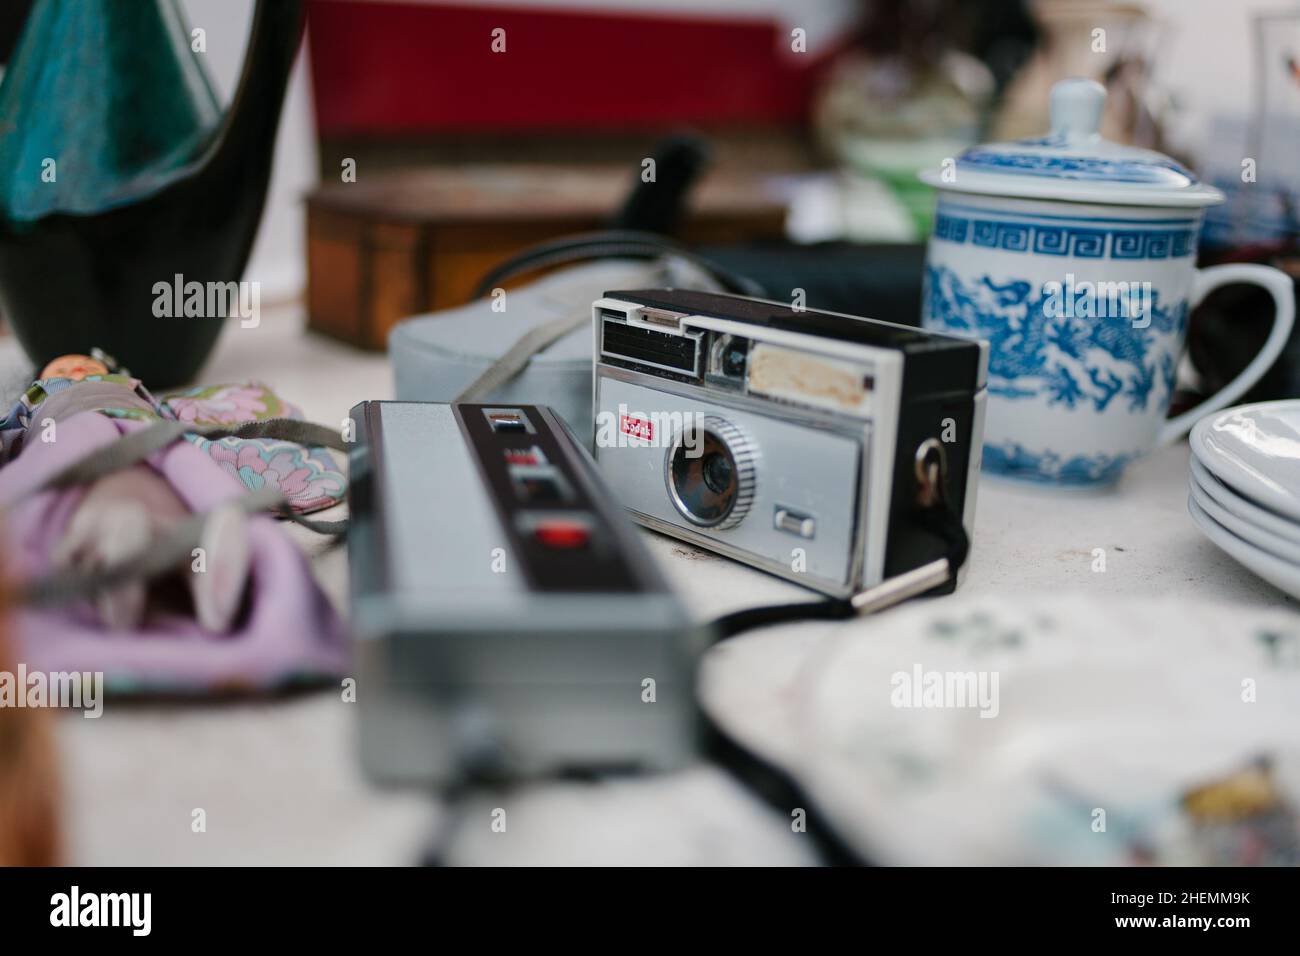 A vintage Kodak camera and other items for sale in a market stall on Byres Road, Glasgow, Scotland. Stock Photo